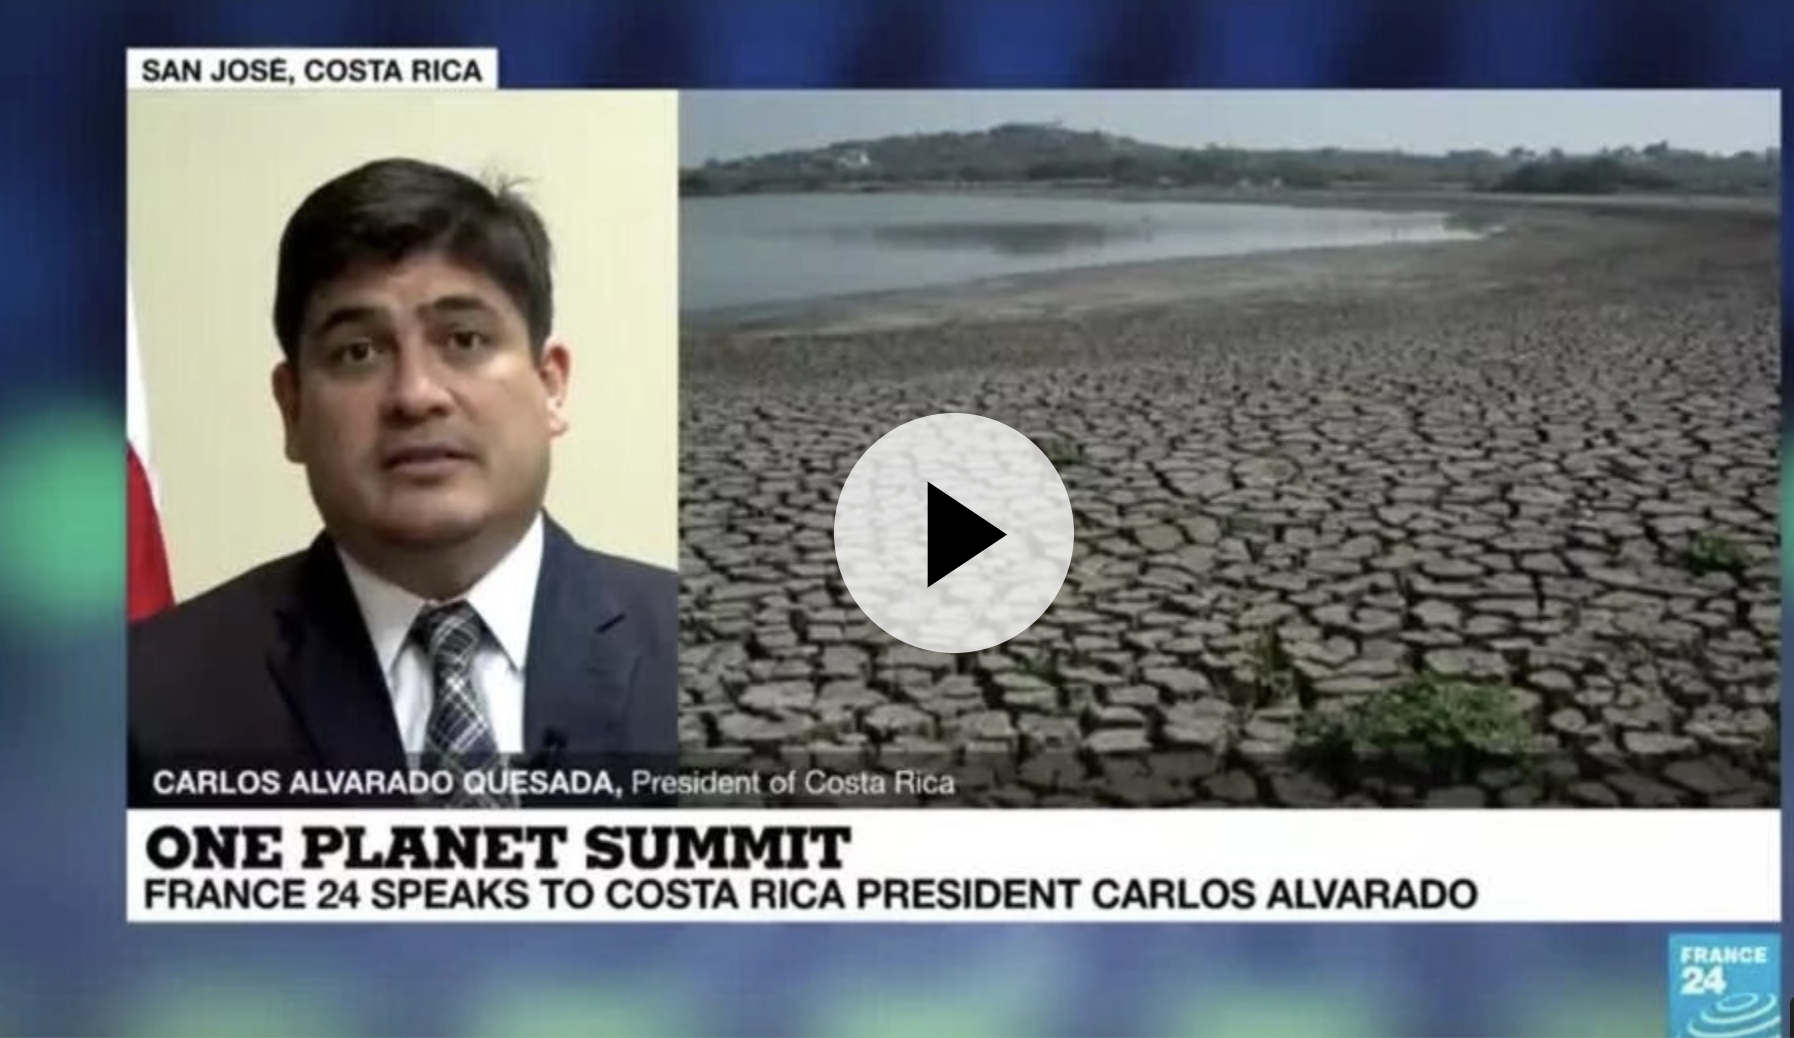 'Losing biodiversity creates problems for humanity,' Costa Rica's president tells FRANCE 24